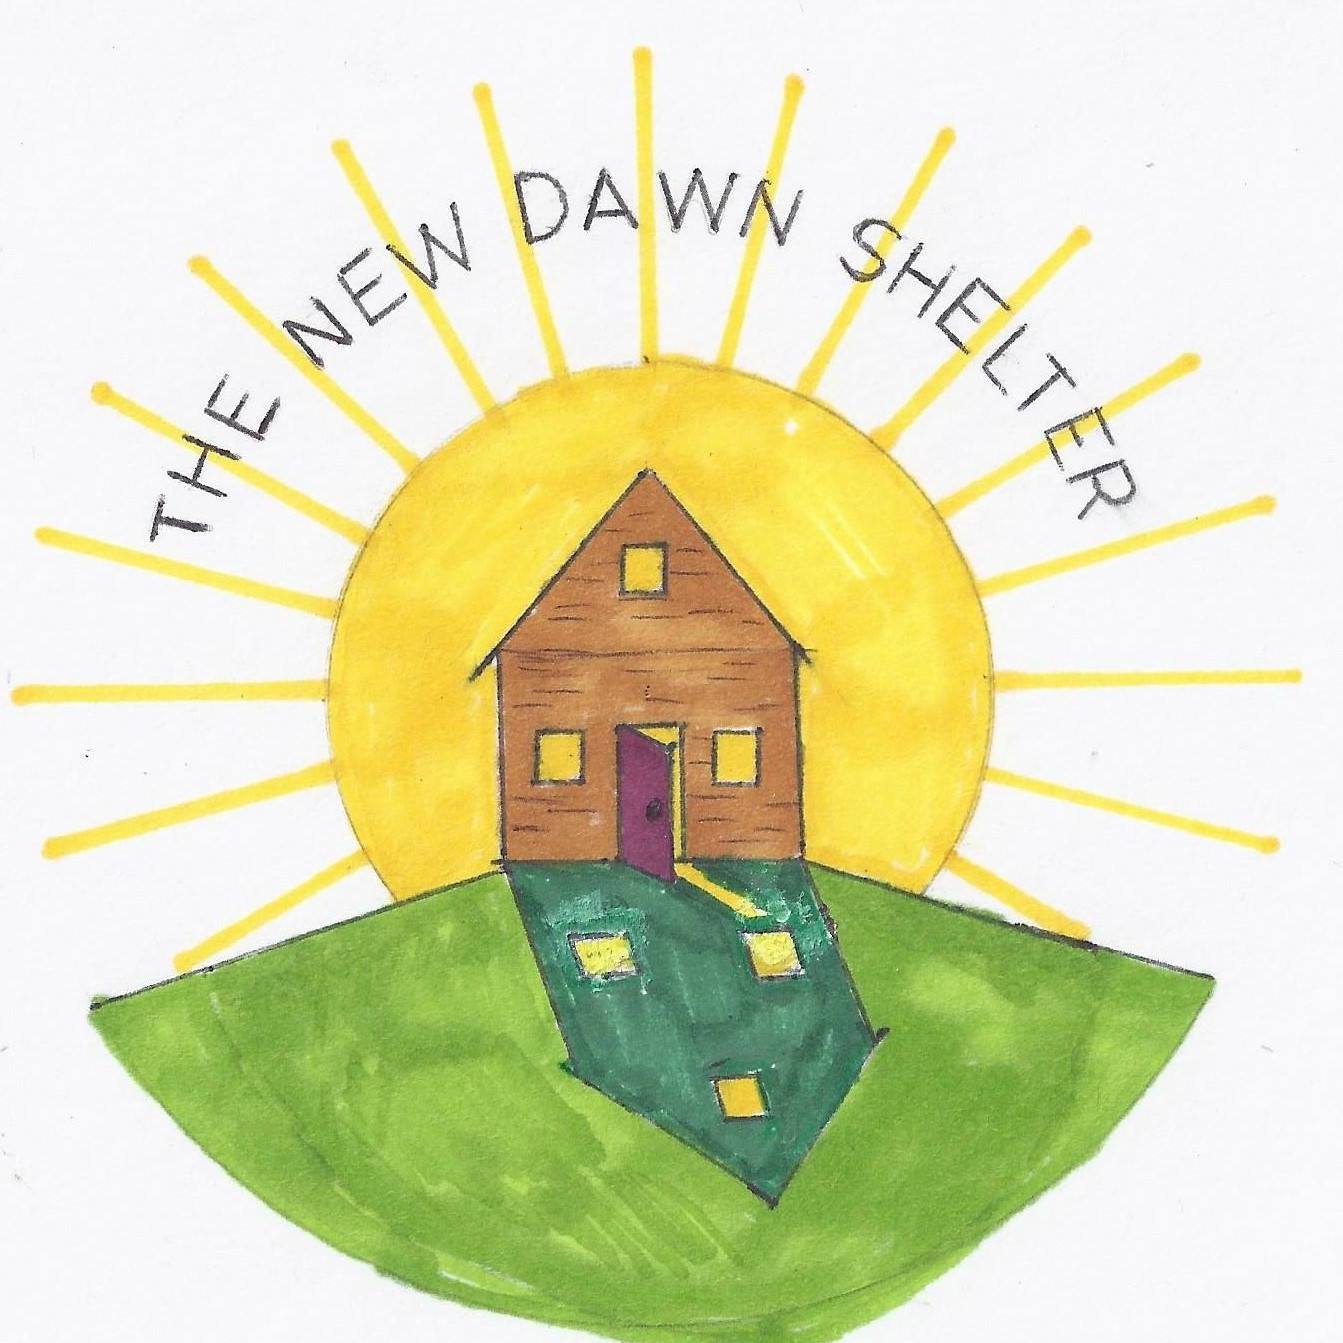 New Dawn Shelter of Gladwin County